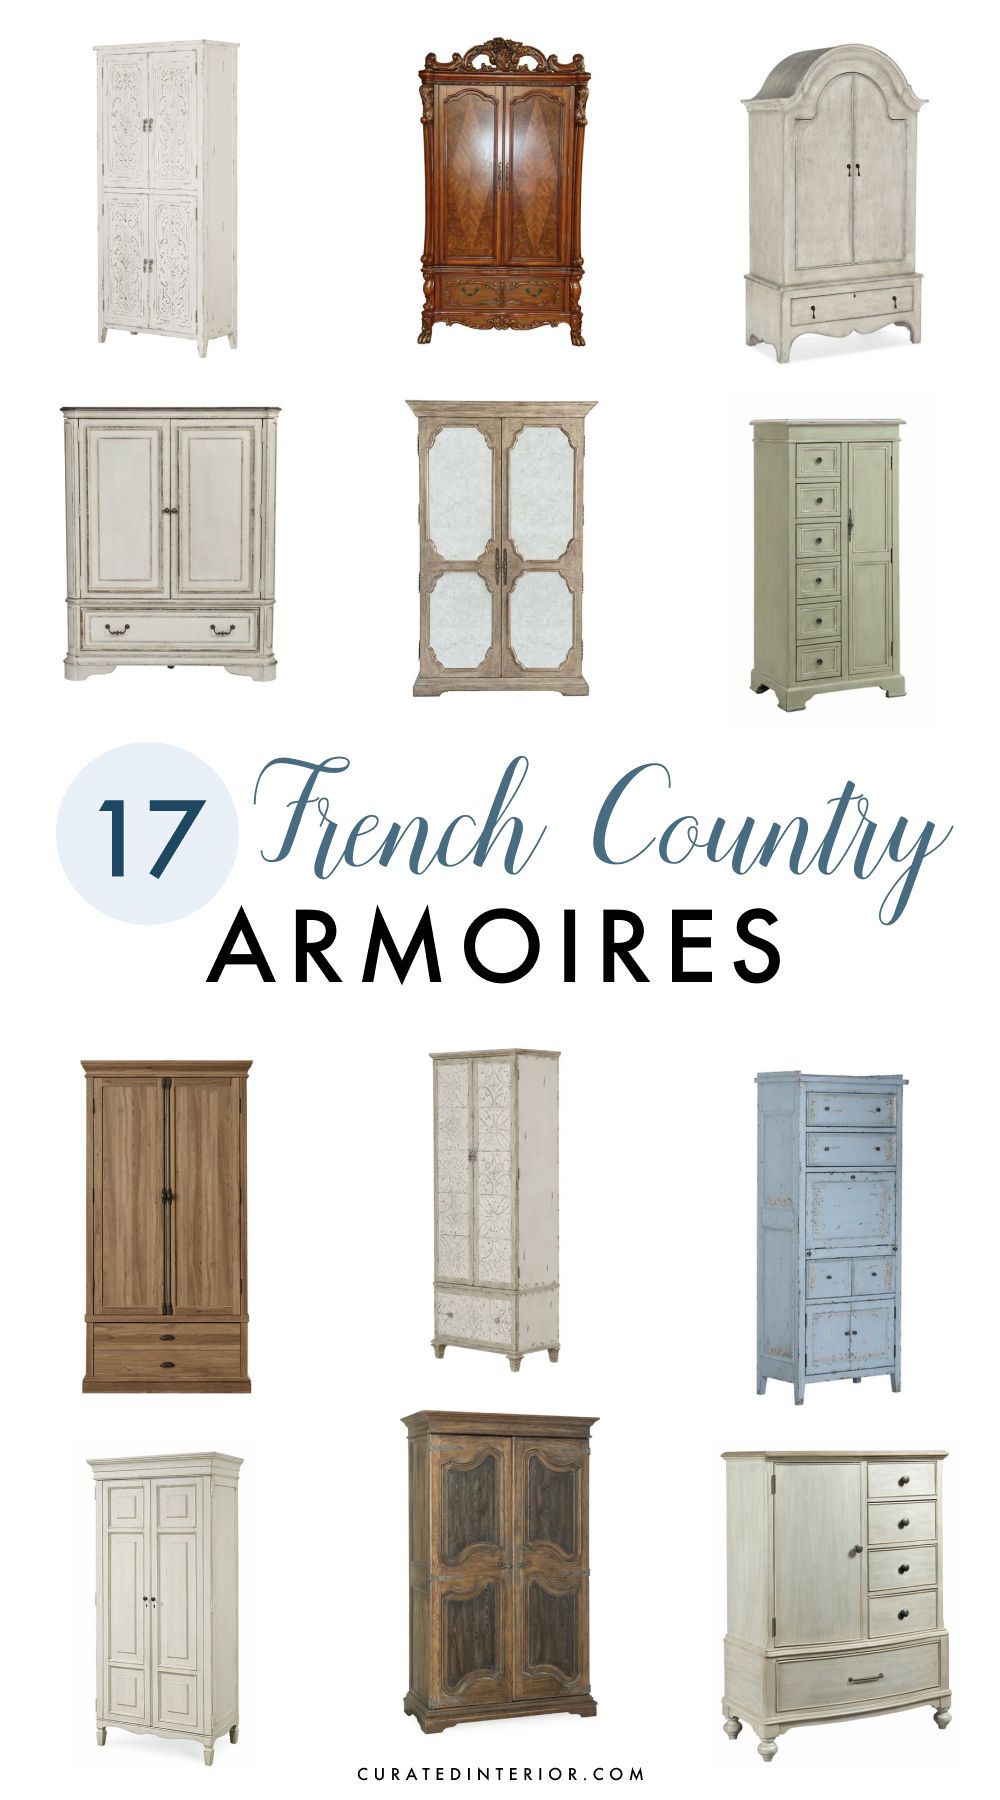 17 French Country Armoires with Charm